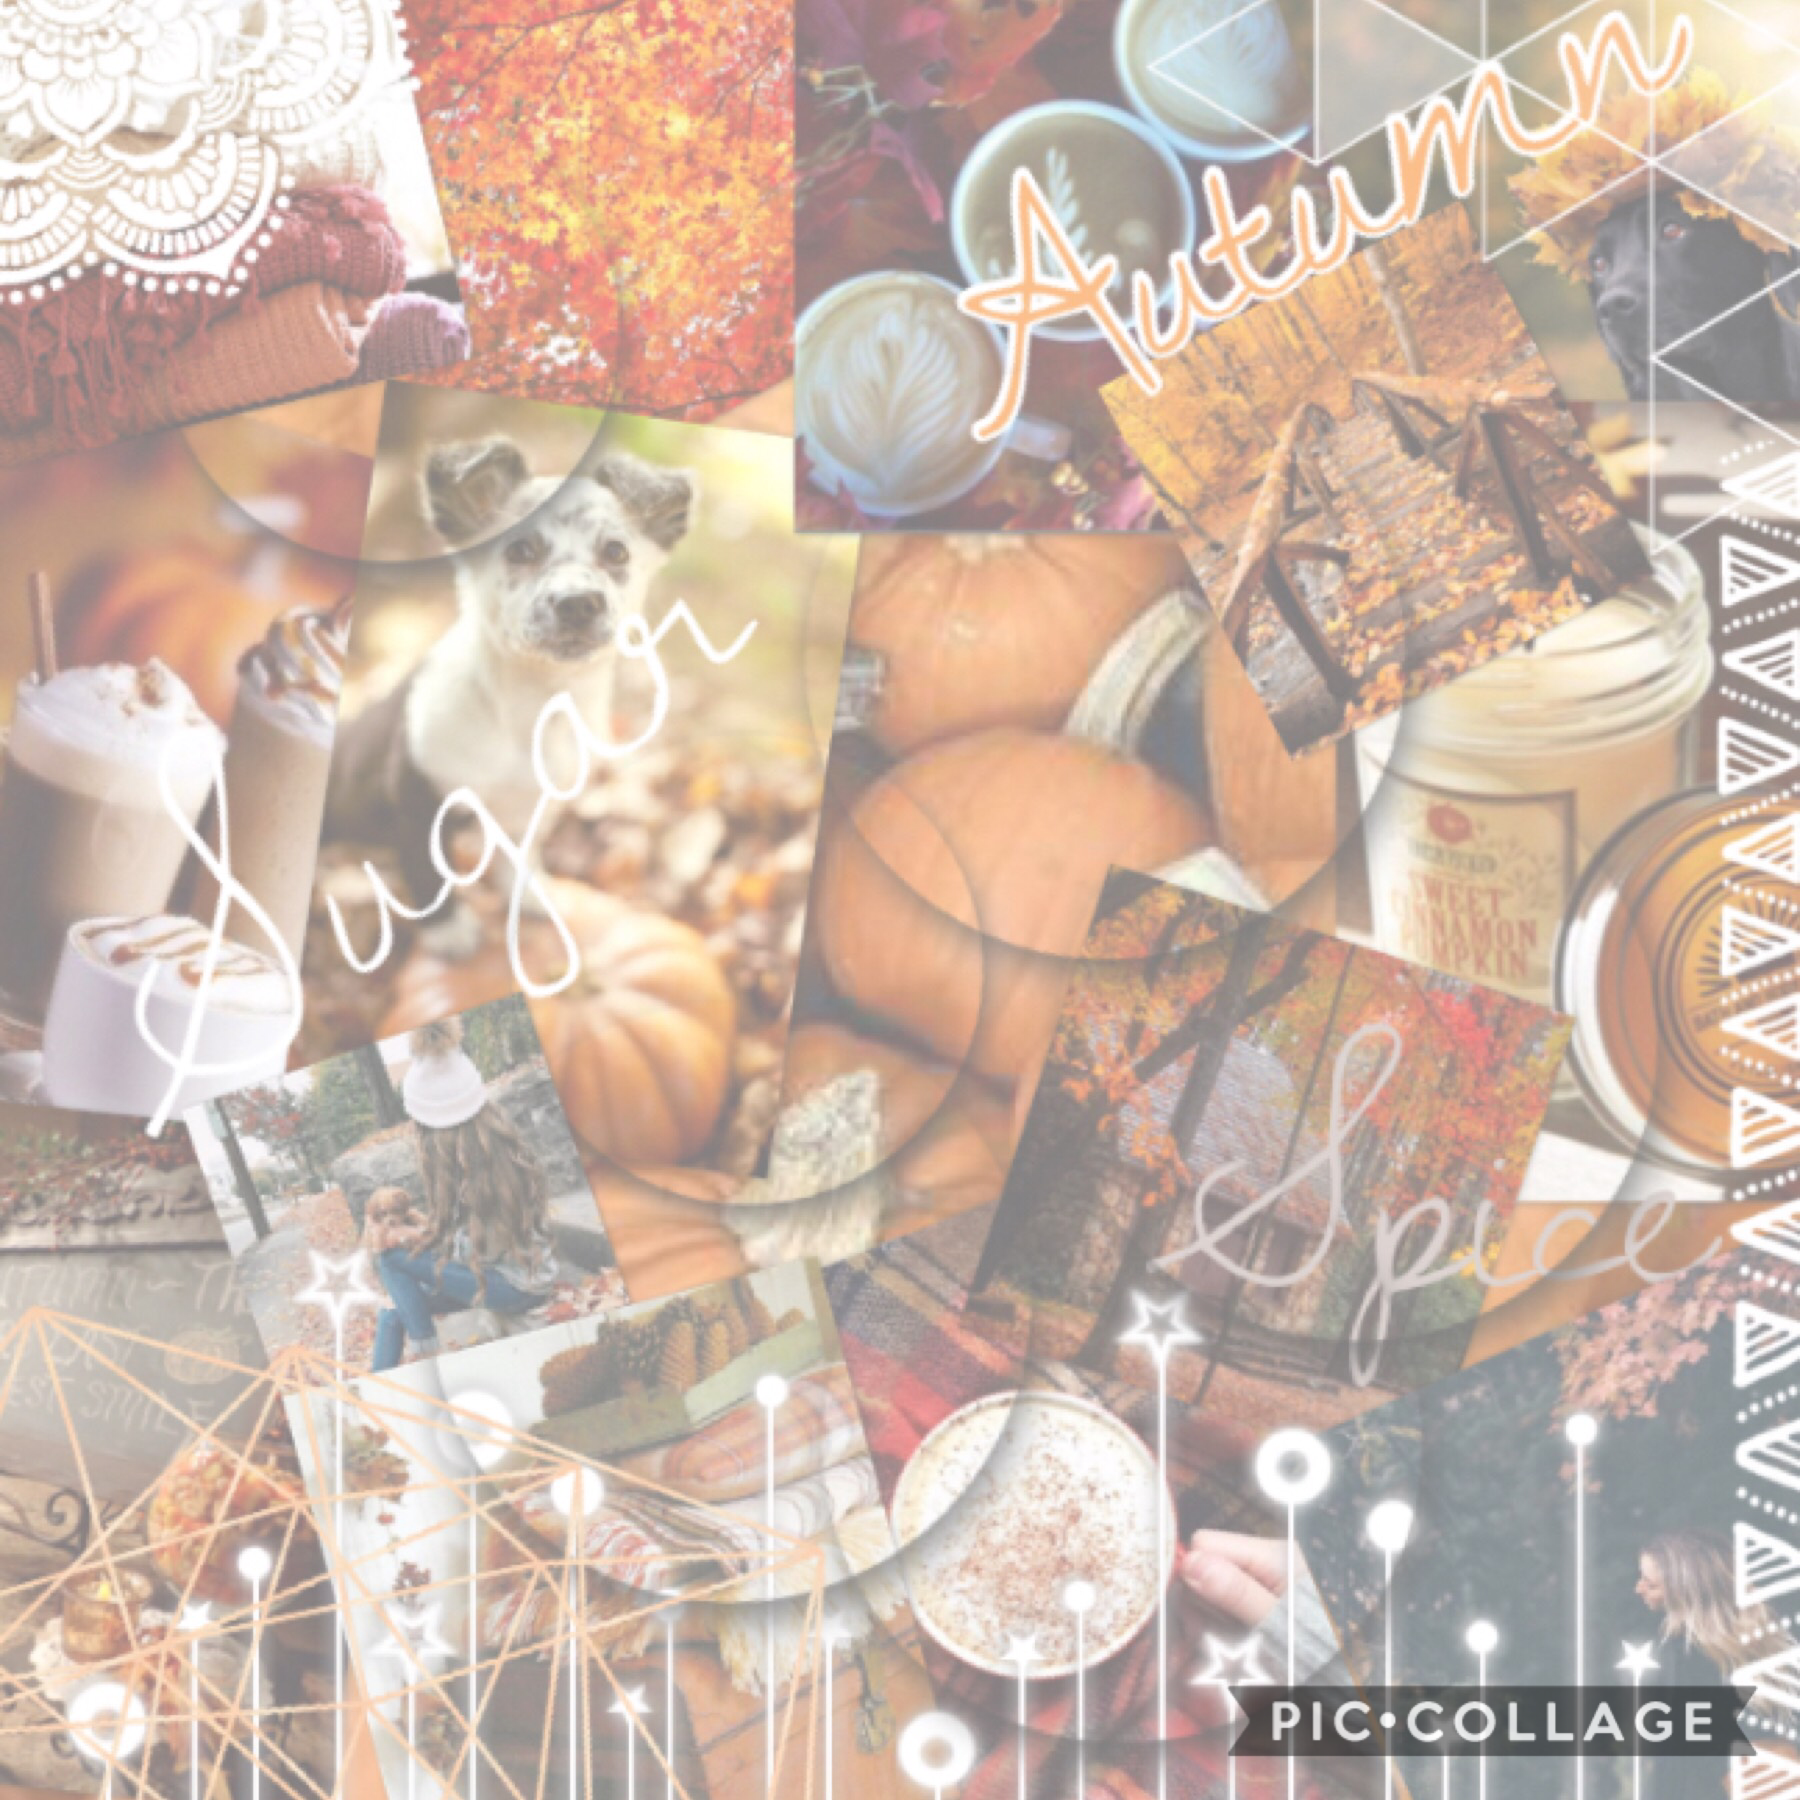 🍂Tap🍂 
My first collage that I’ve made with several photos! I hope you guys like it. It definitely took a while!!